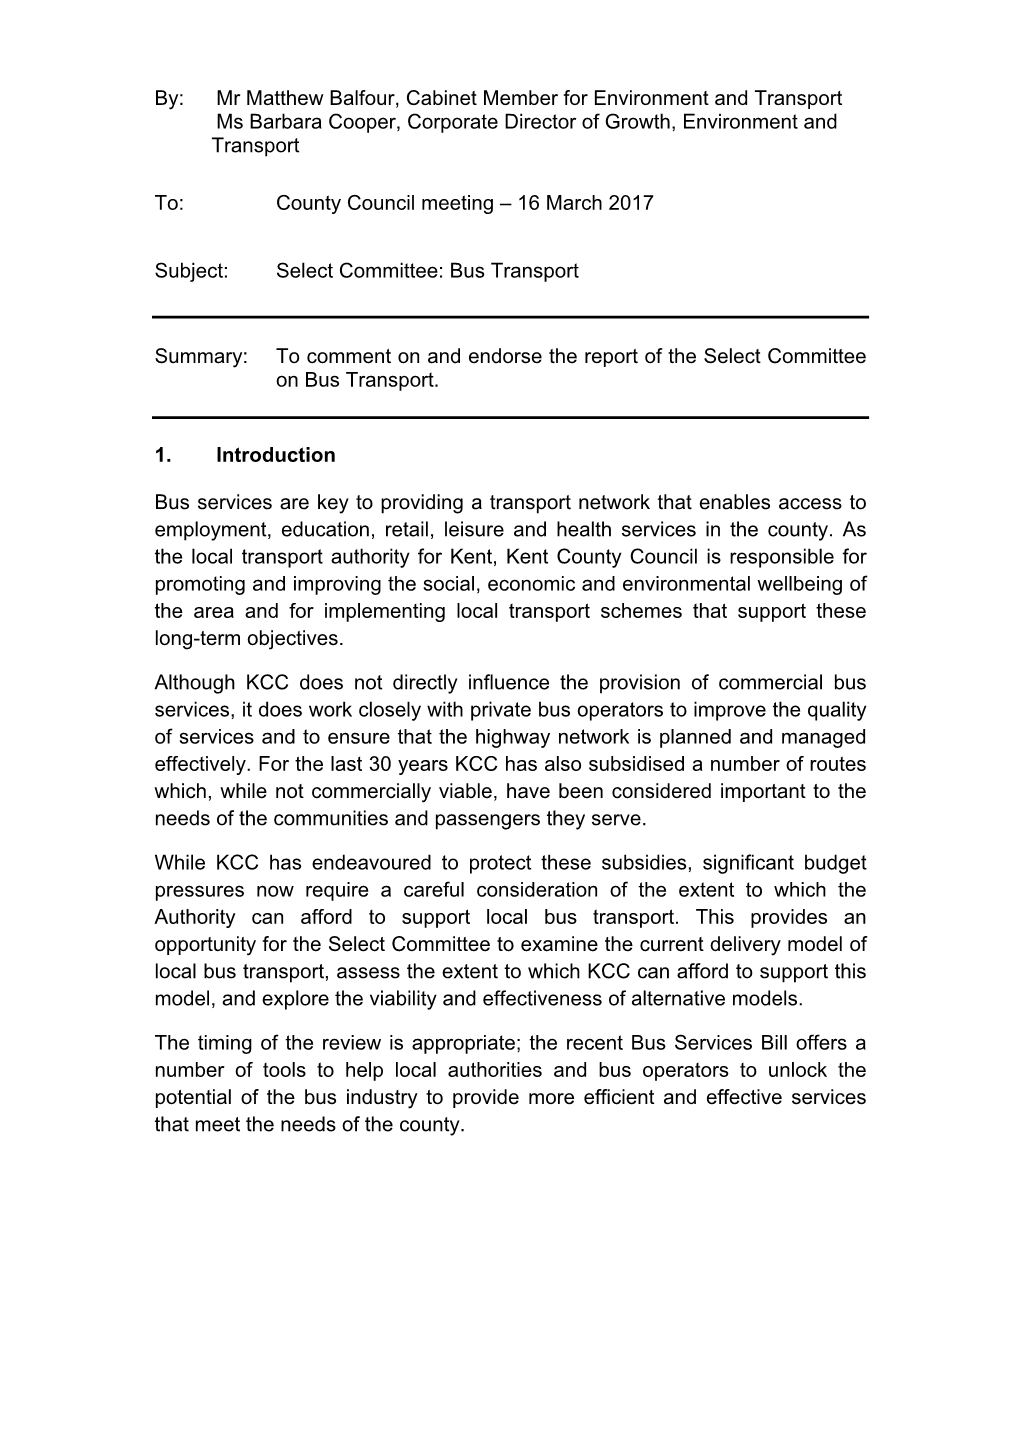 Select Committee: Bus Transport PDF 332 KB